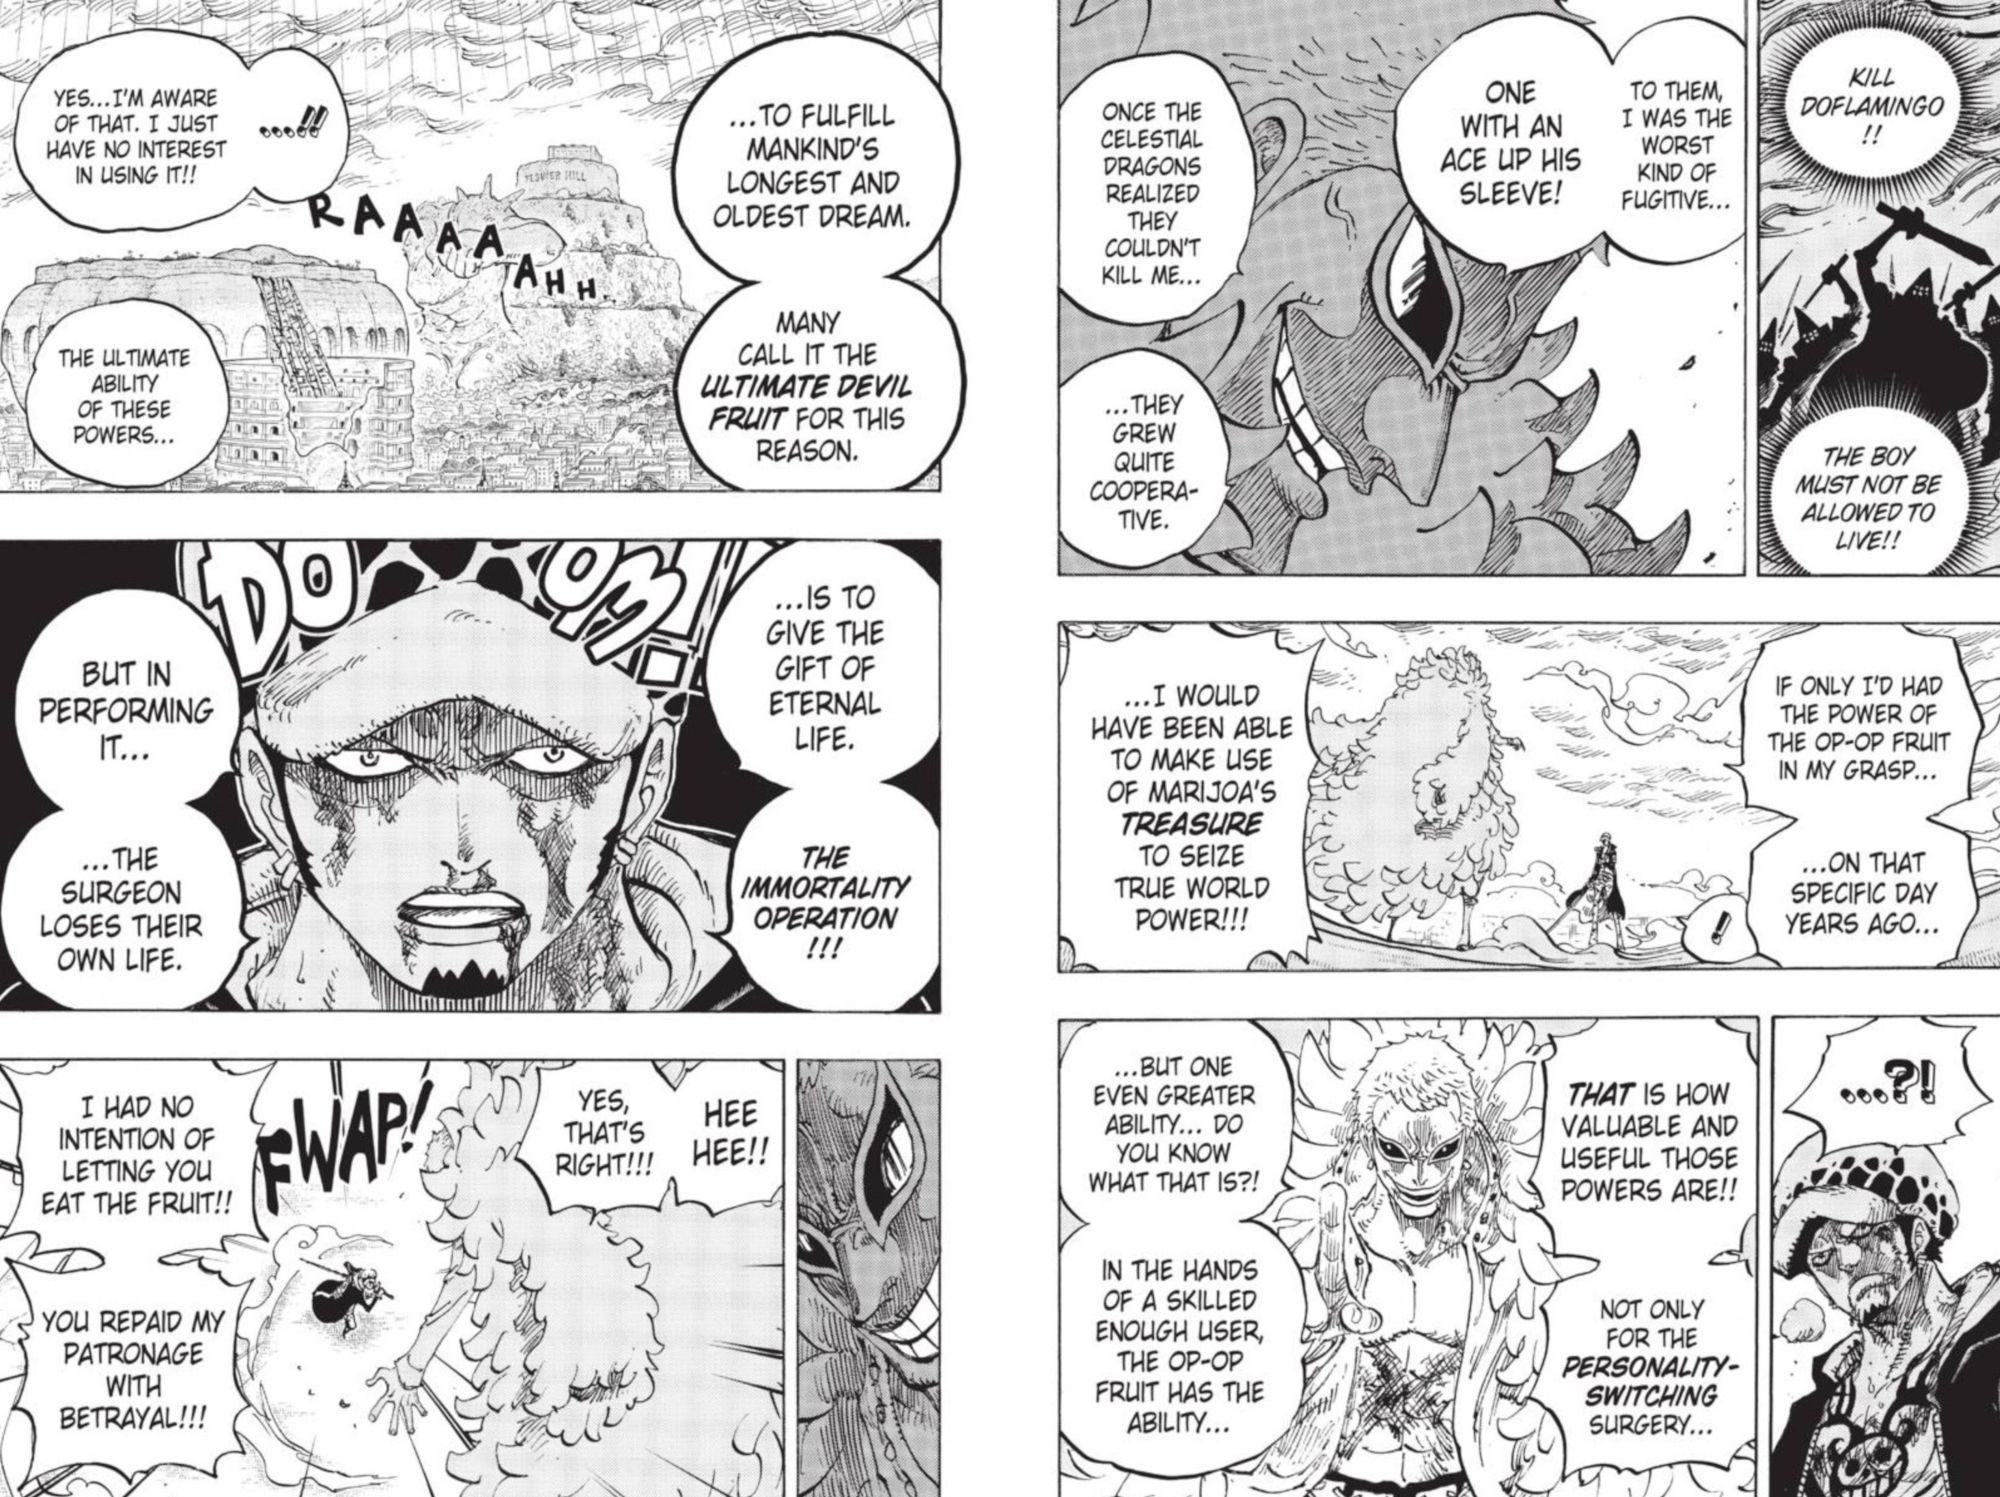 Manga panels from One Piece chapter 761 how Law and Doflamingo discussing the op-op fruit's ultimate ability of making someone immortal at the cost of the users life.